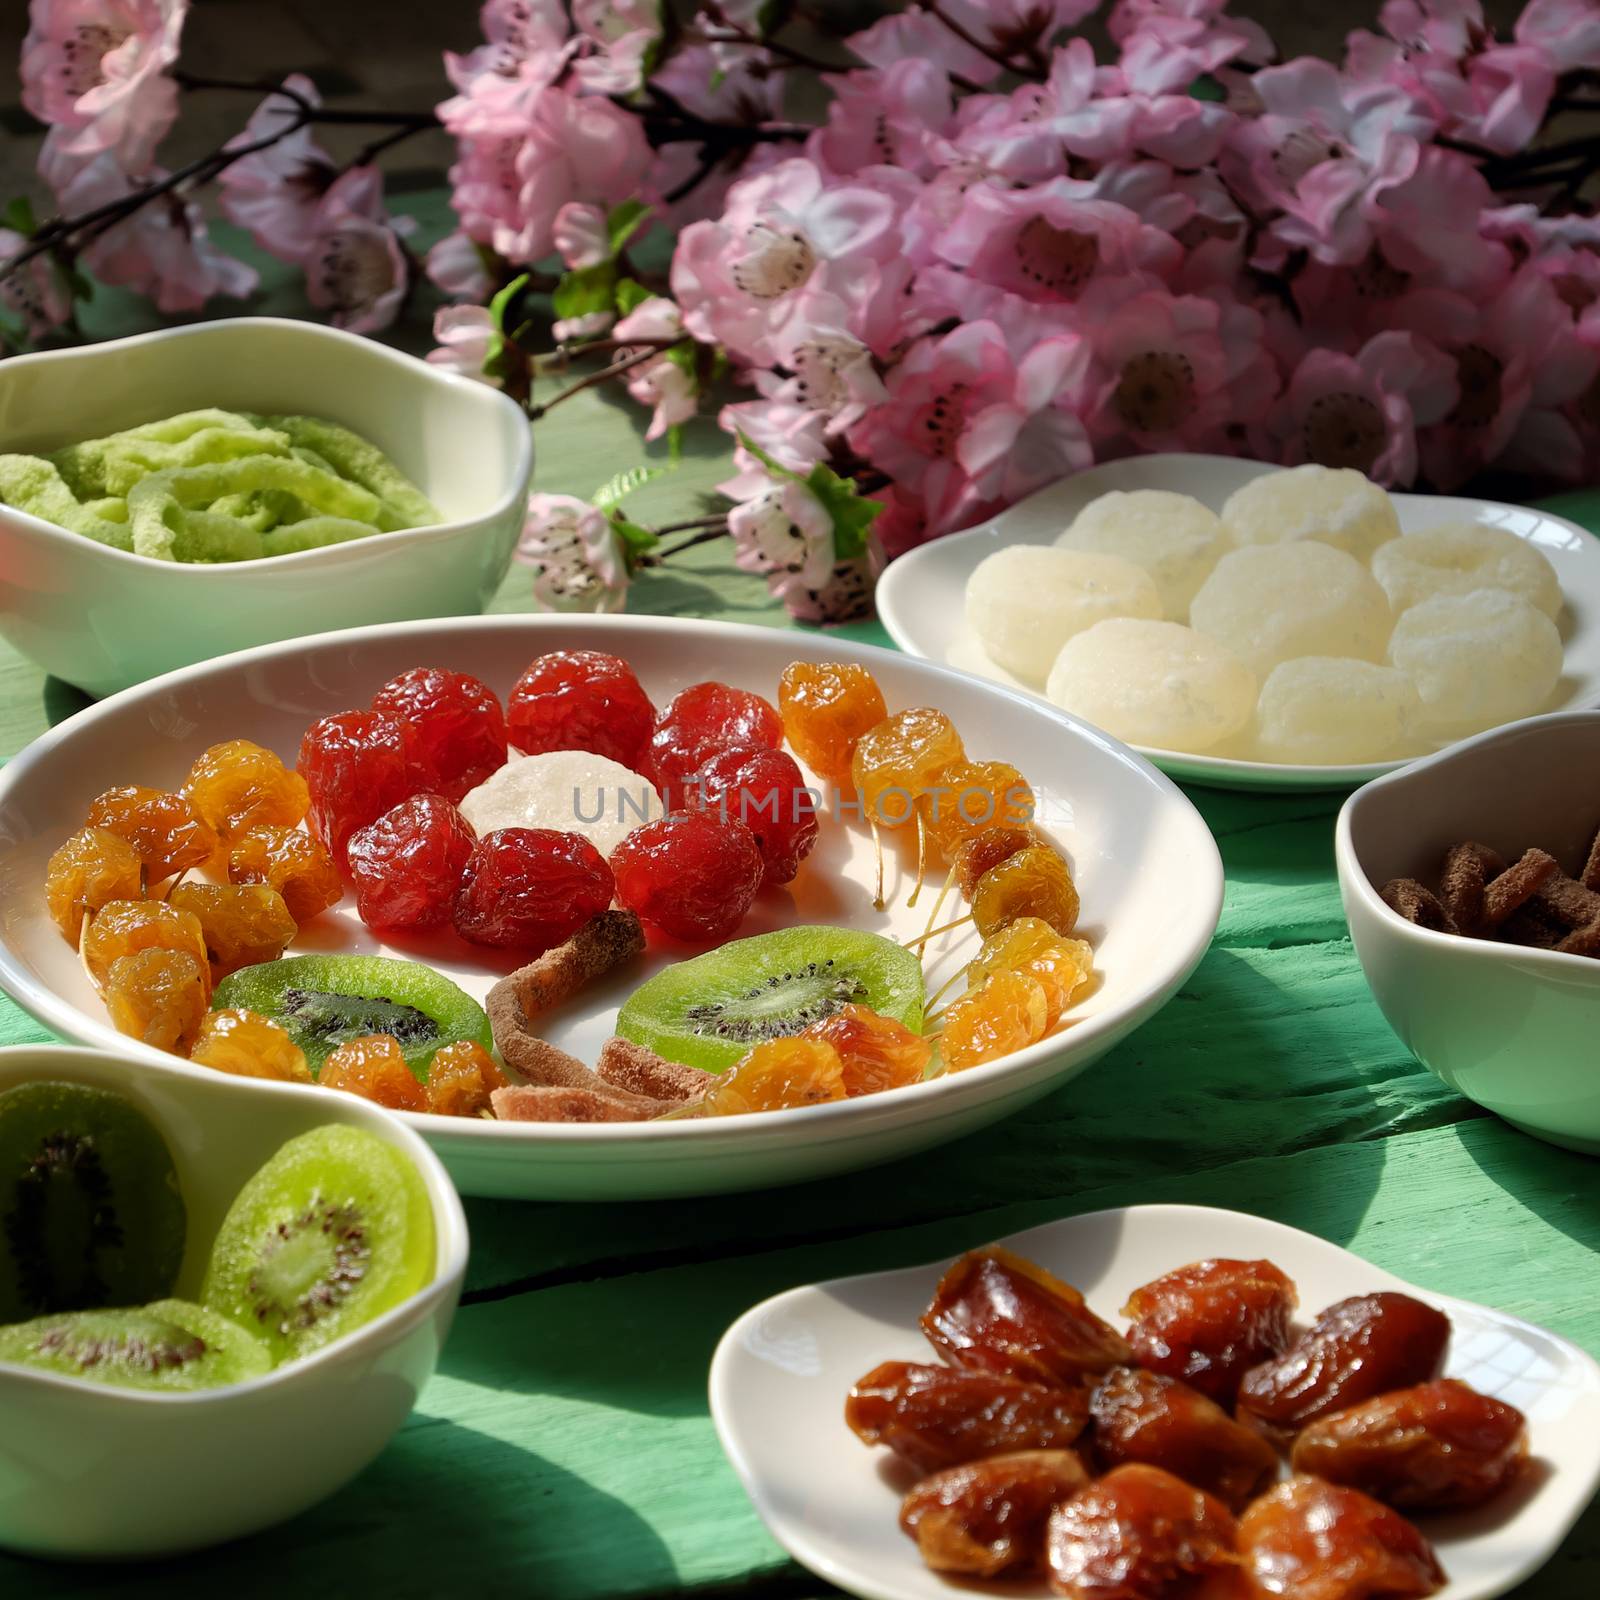 Group of colorful Vietnamese jam for Vietnam Tet holiday on green background, also lunar new year of Asia, traditional preserved fruit from kiwi, damson or coconut jam